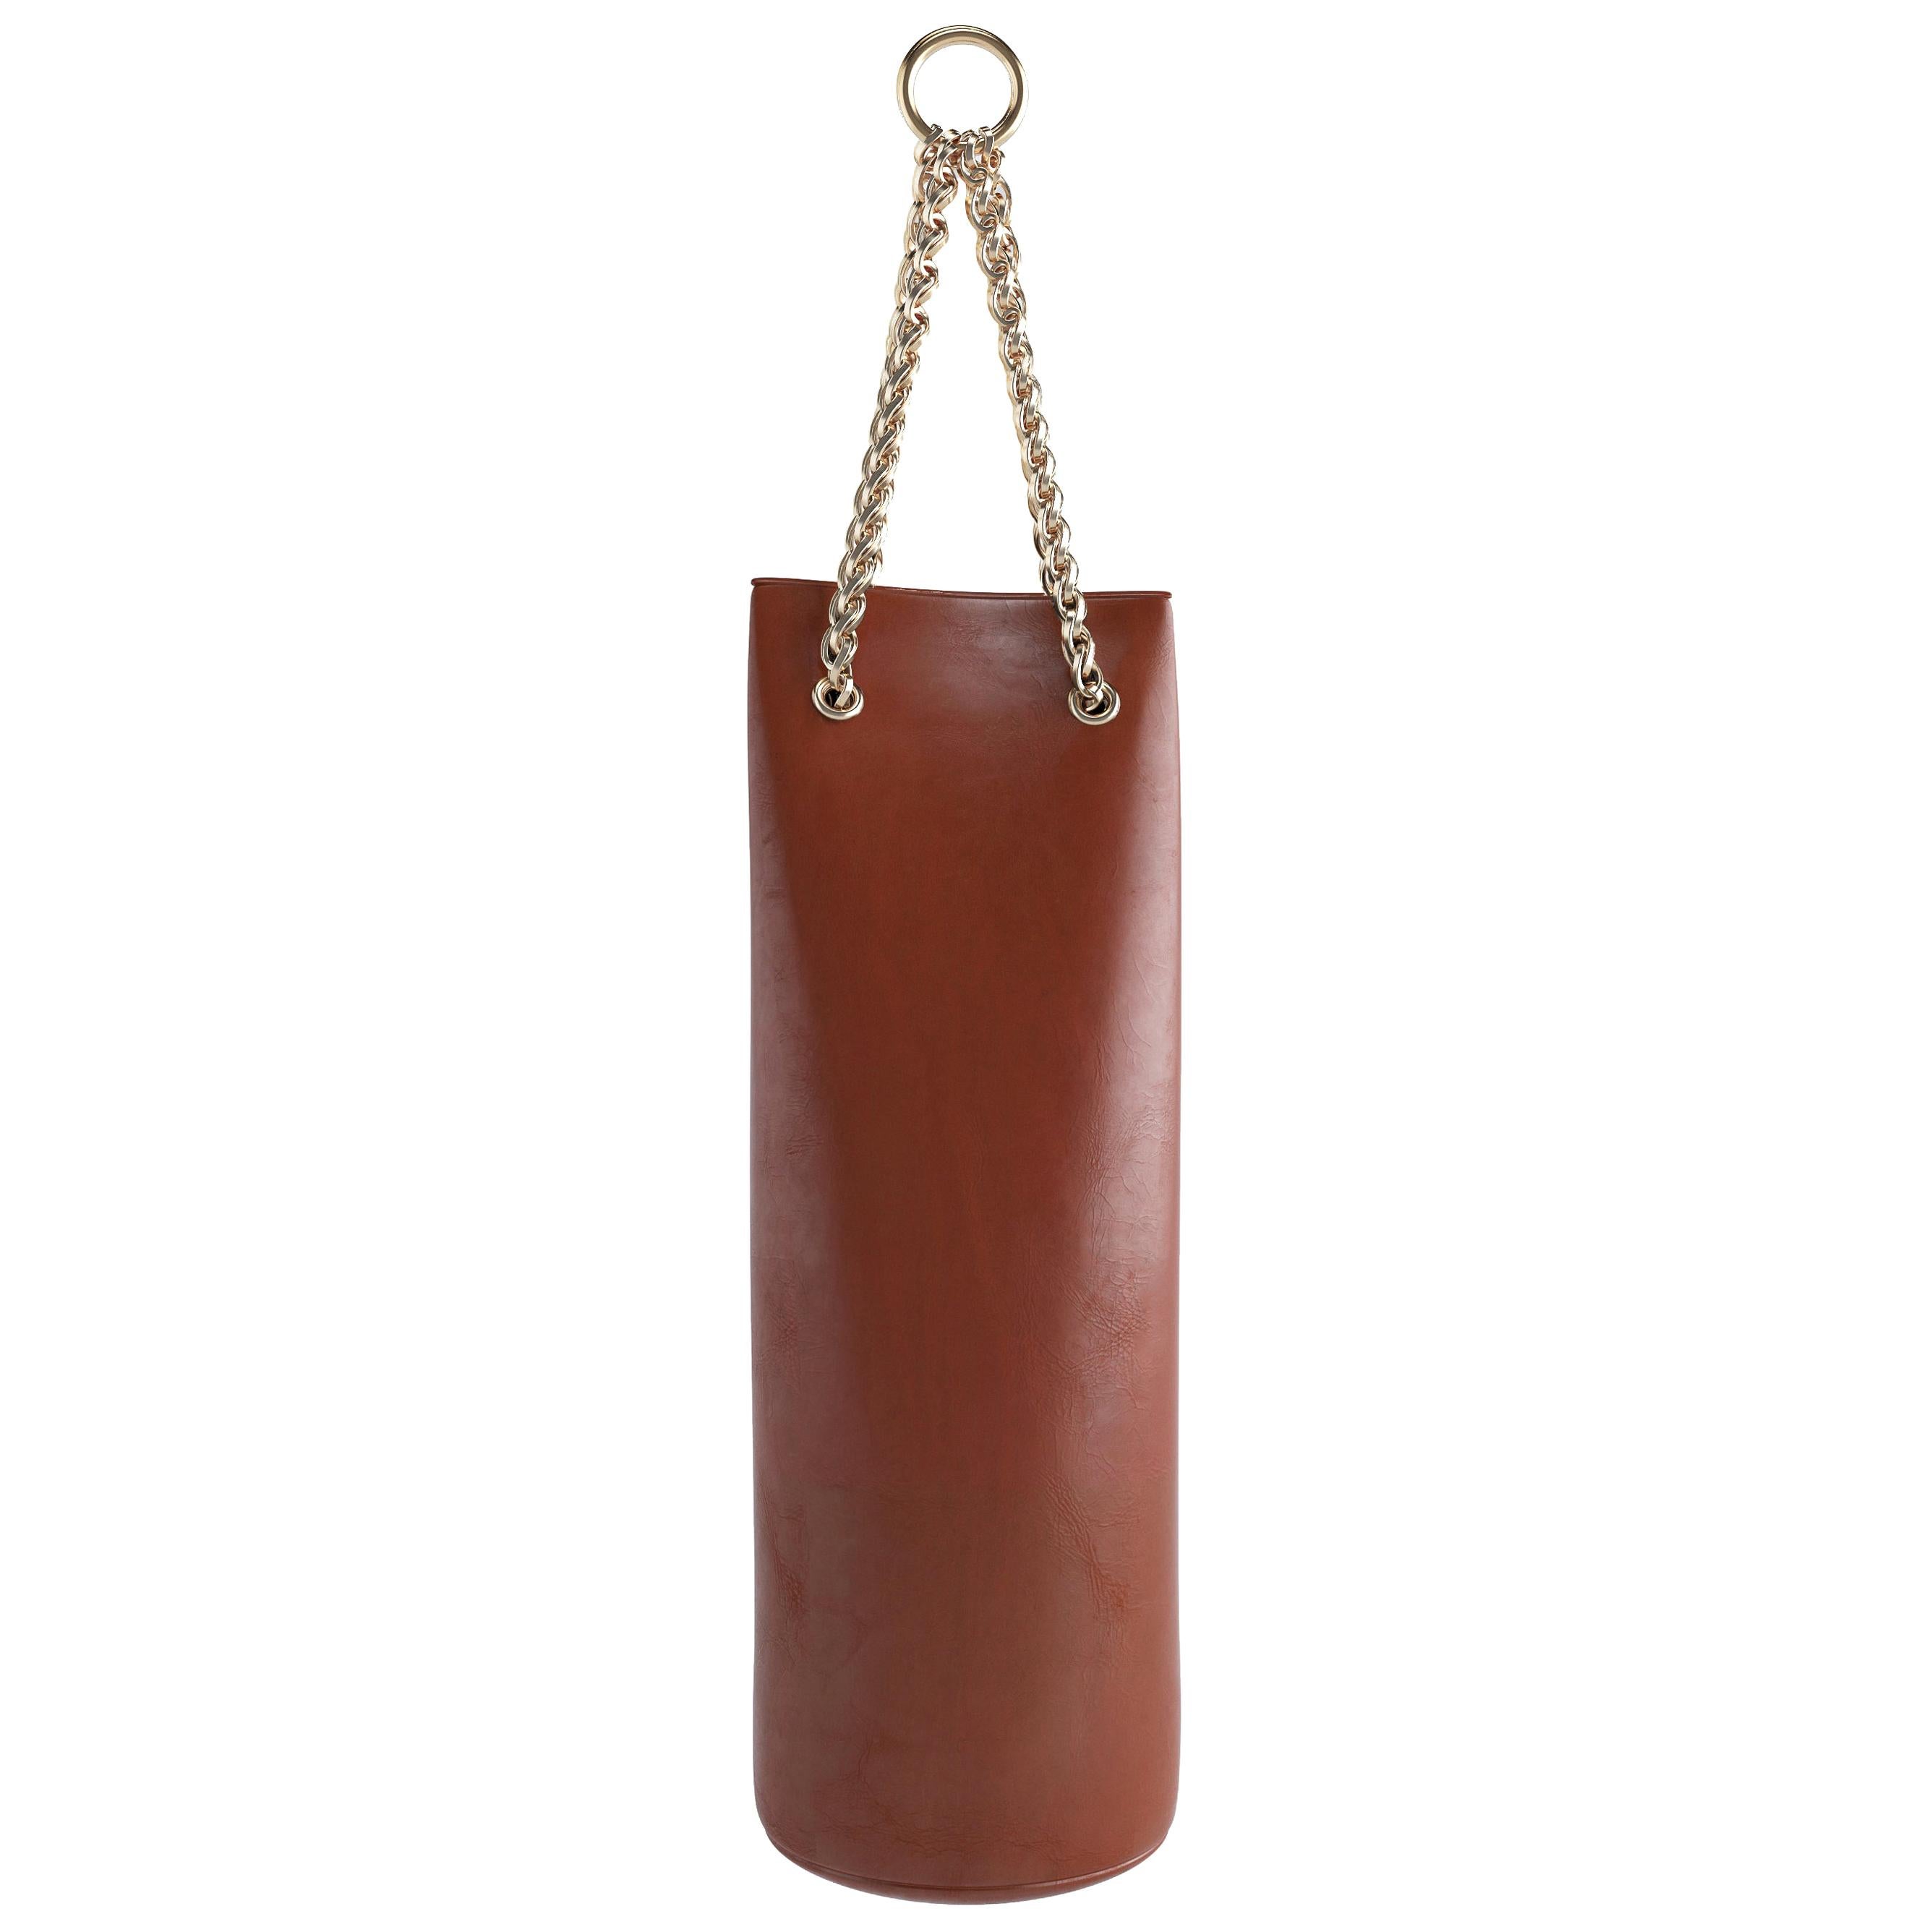 Zeville Brown Handcrafted Leather "Punching Bag" For Sale